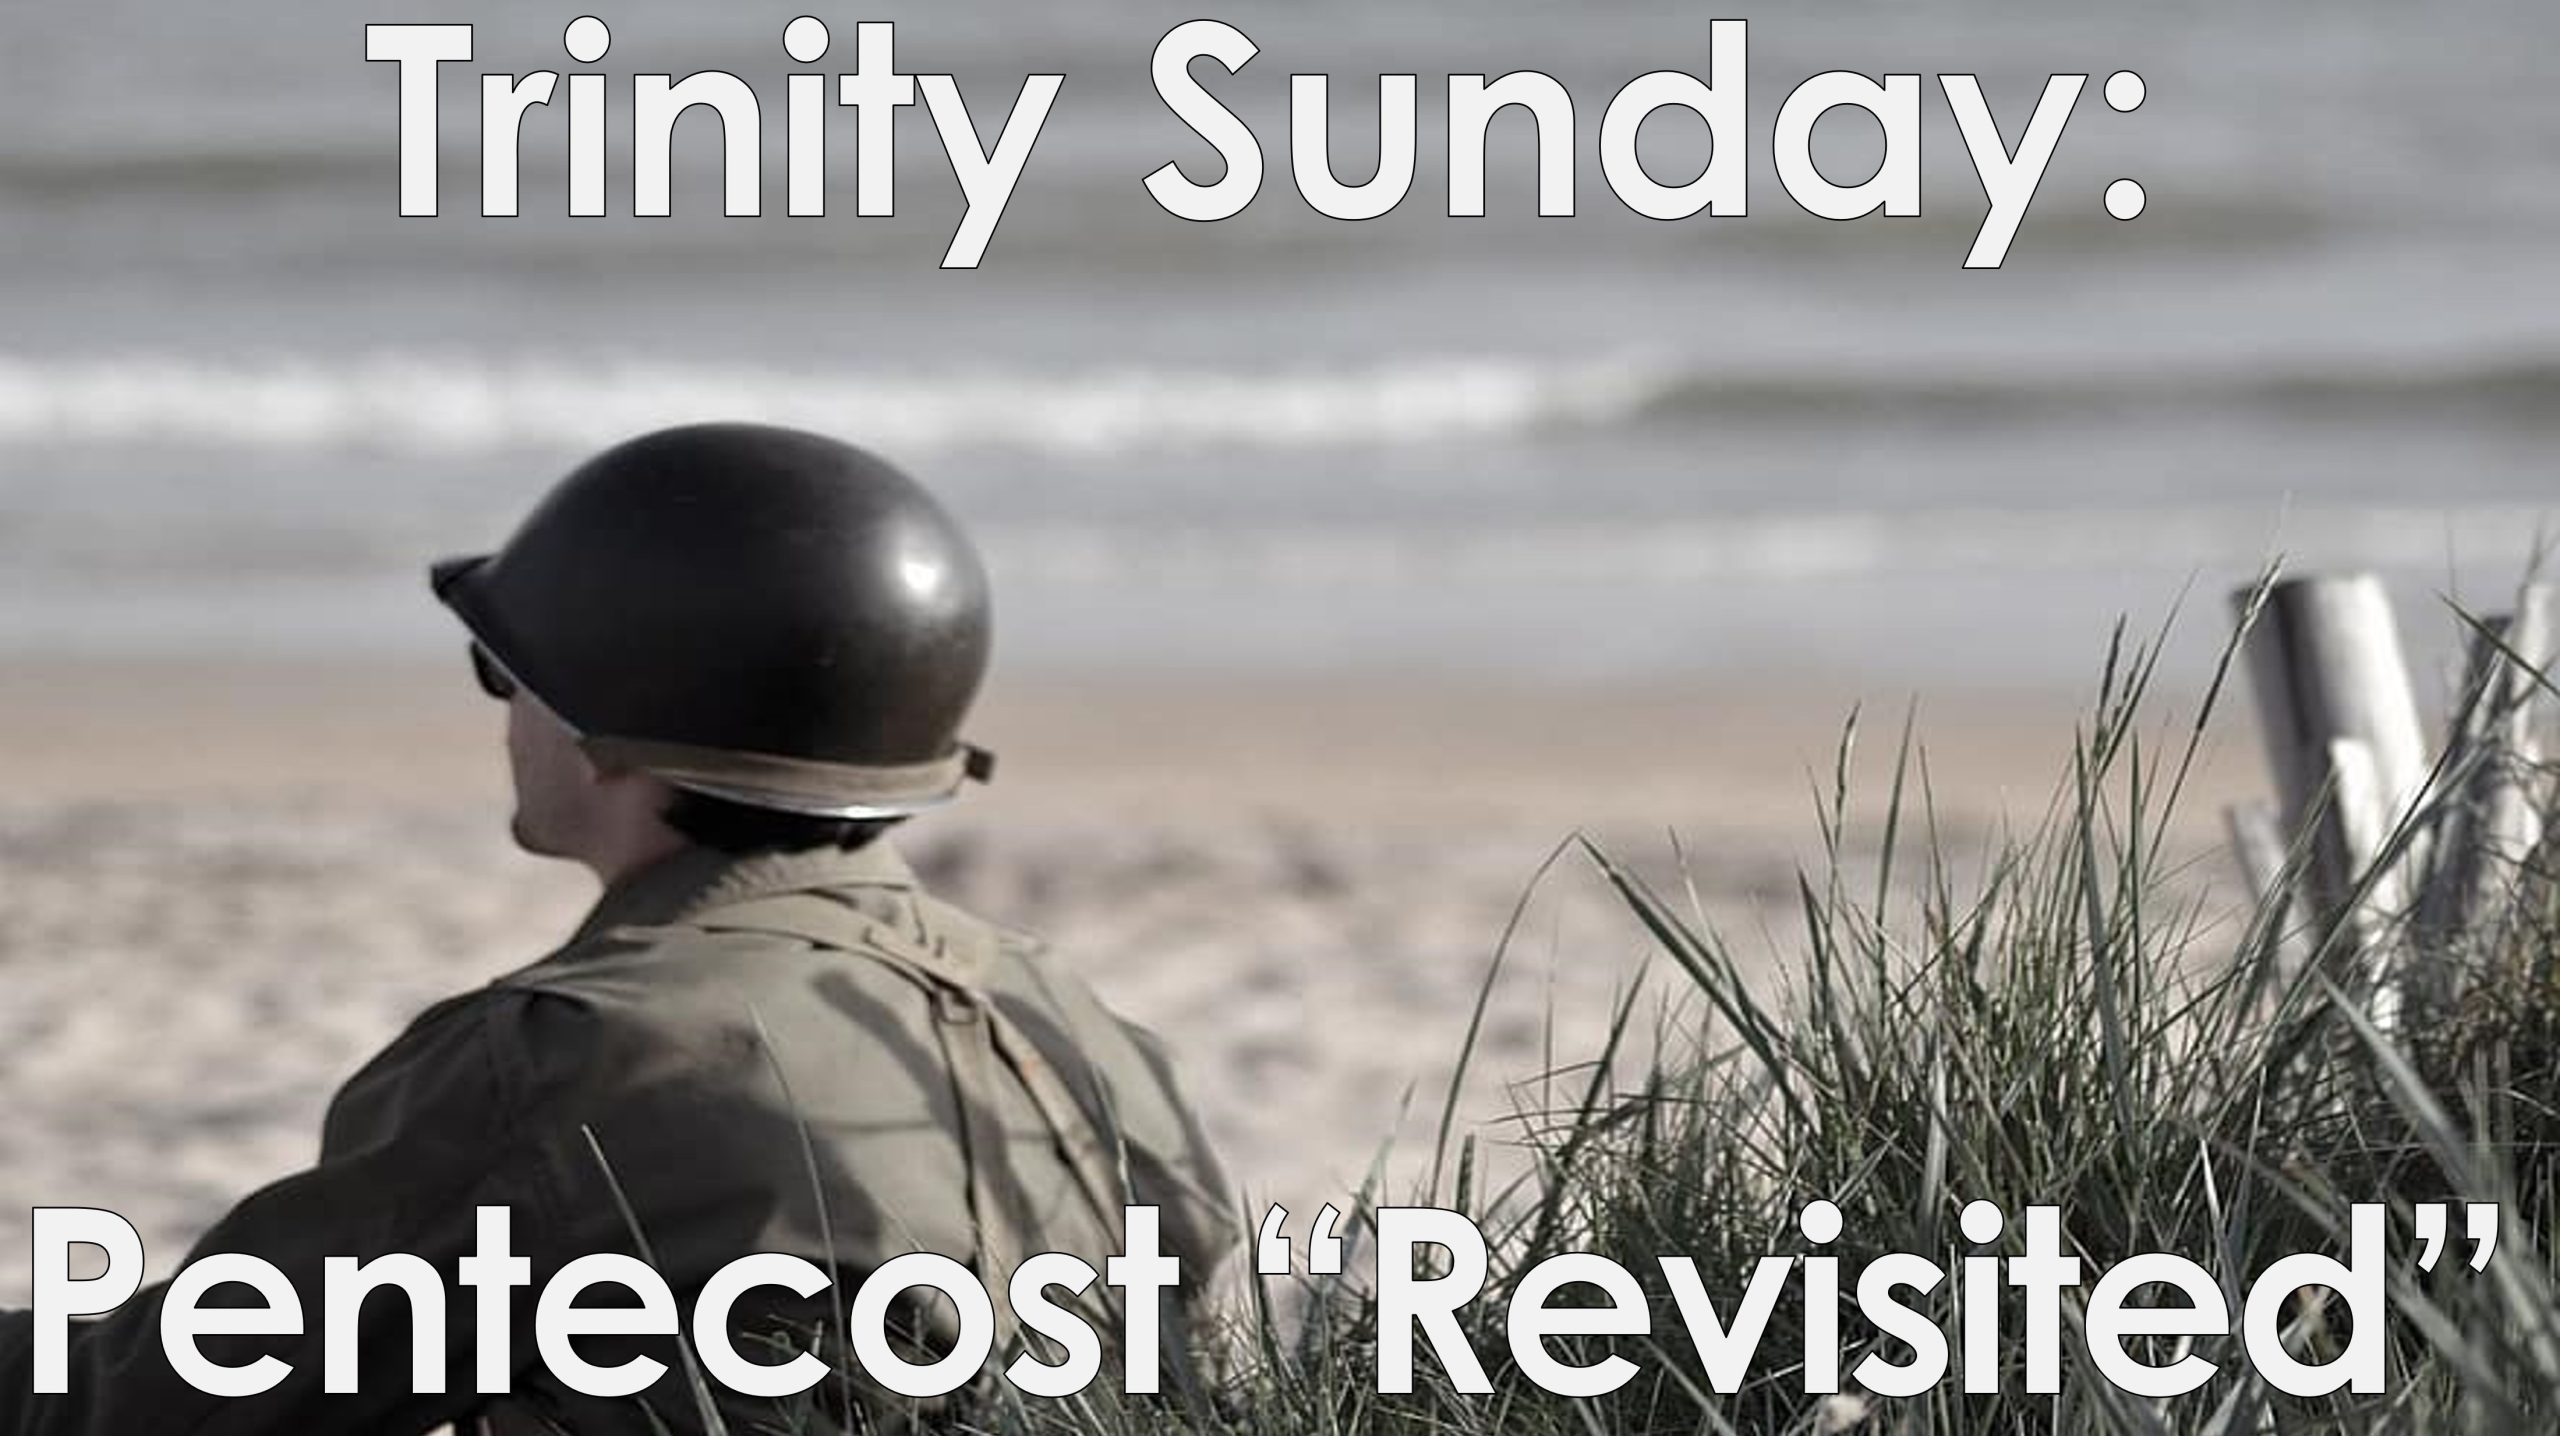 You are currently viewing Trinity Sunday: Pentecost “Revisited” – May 26th